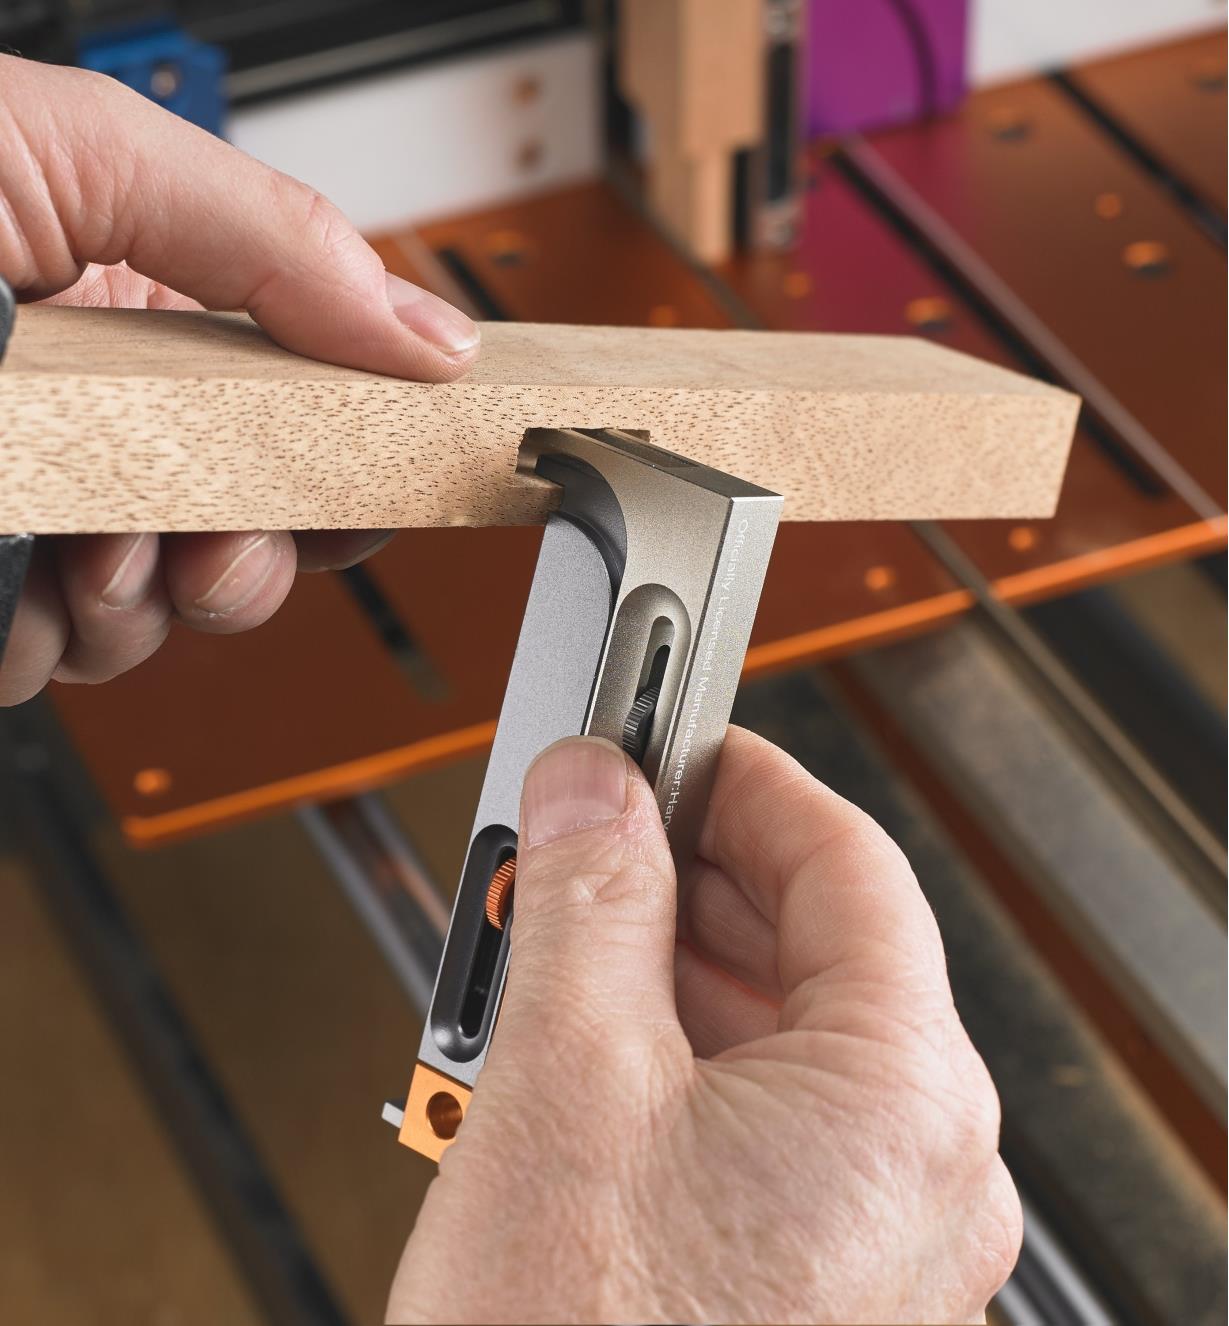 Referencing the Tenonmaker against a mortise